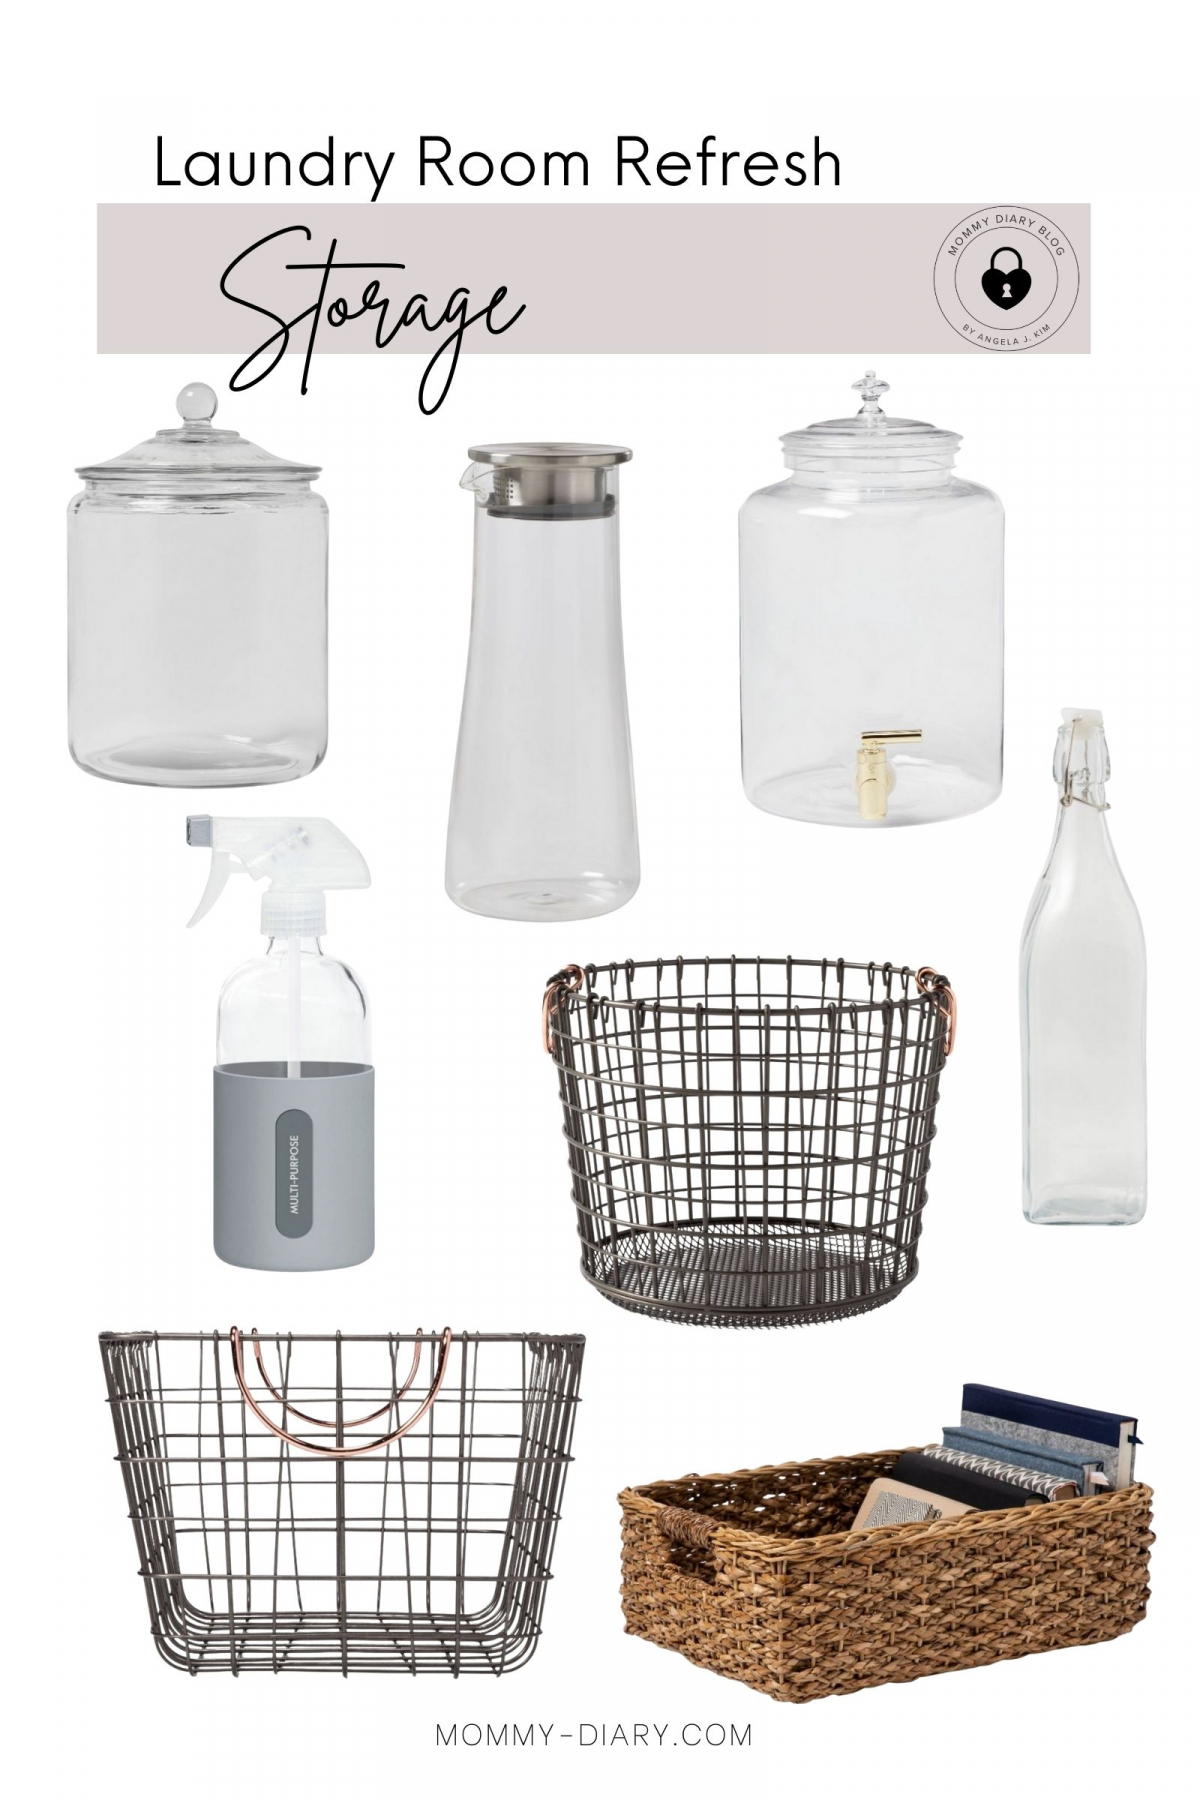 Laundry room refresh for spring